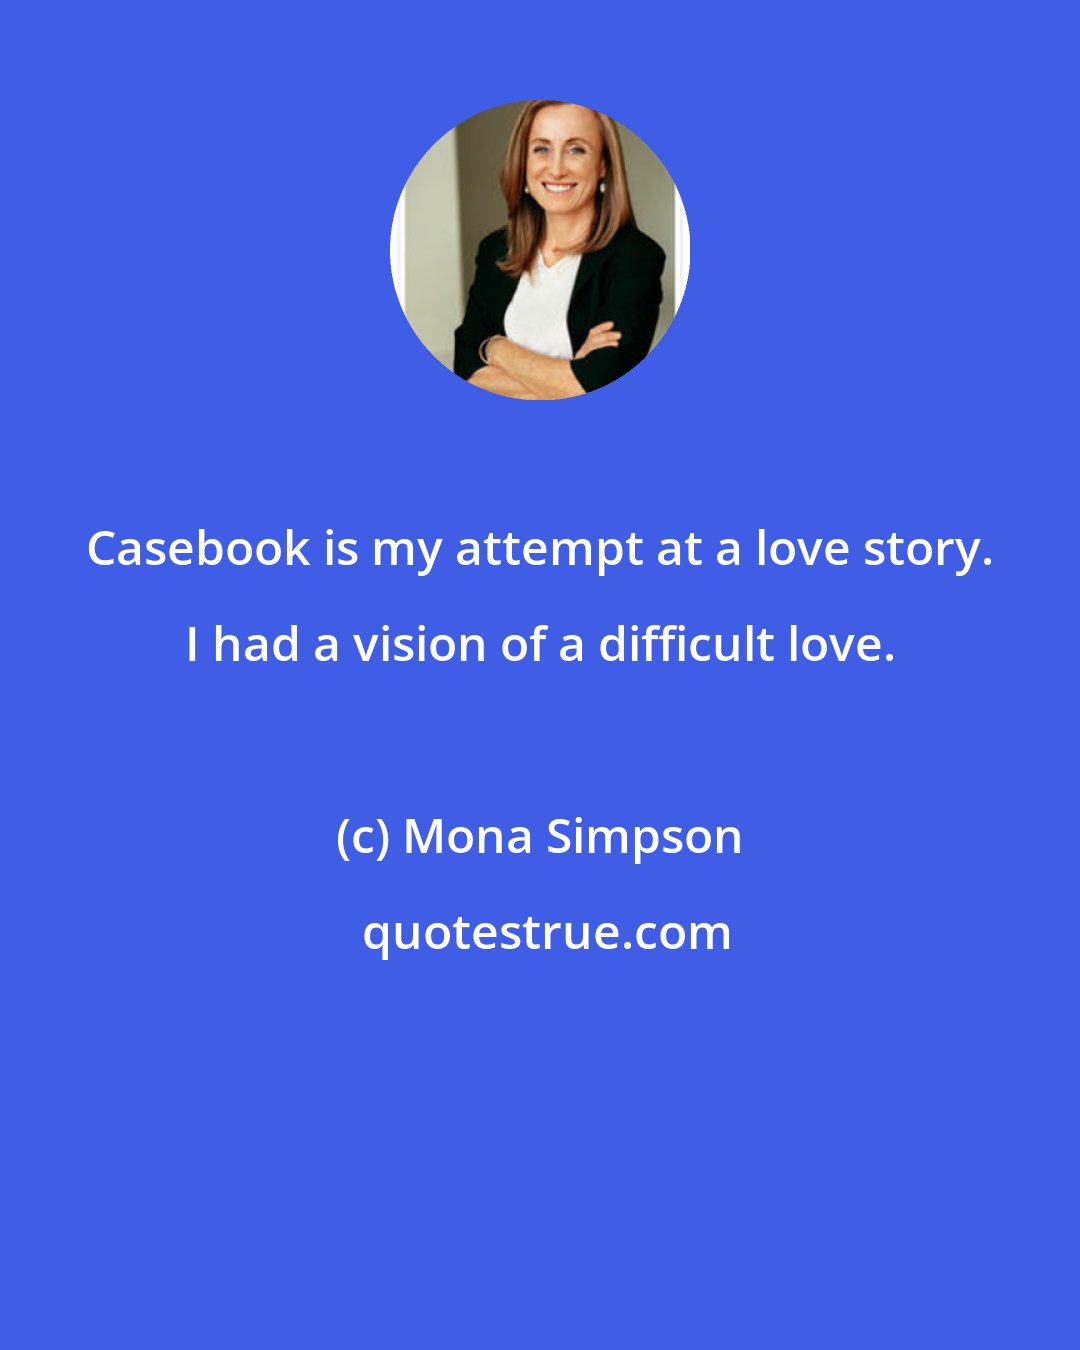 Mona Simpson: Casebook is my attempt at a love story. I had a vision of a difficult love.